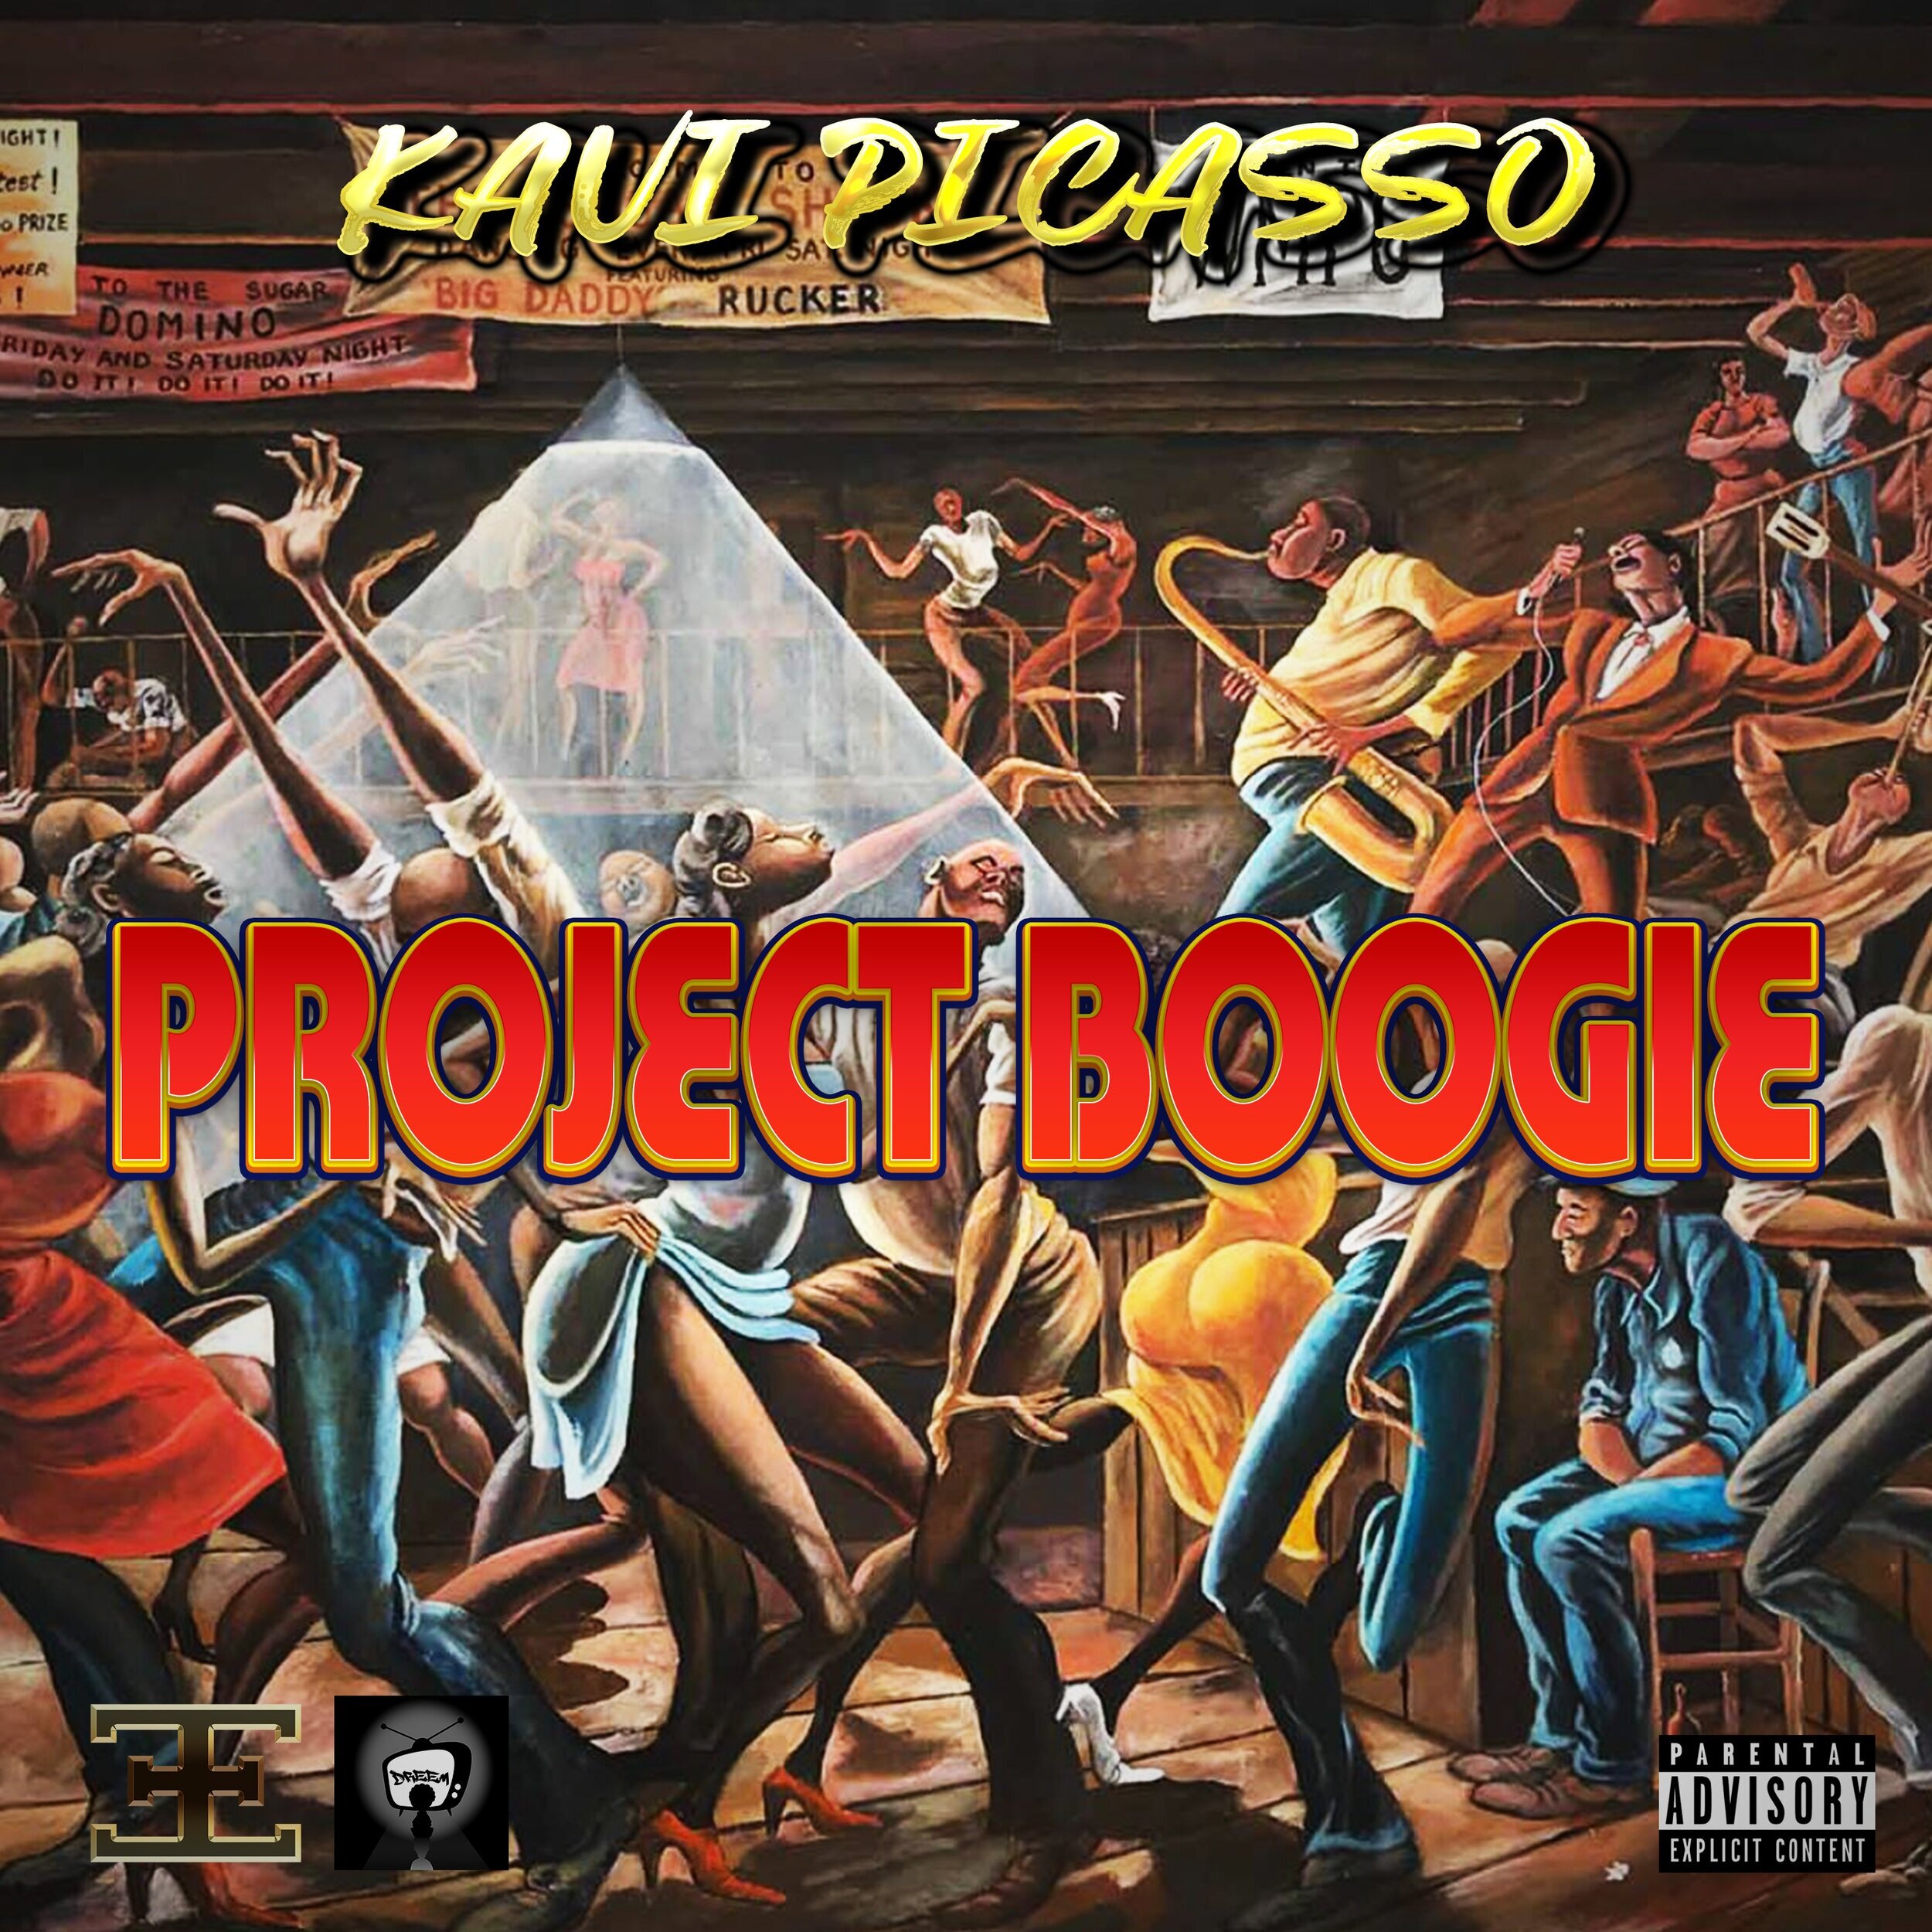 Kavi Picasso "Project Boogie"